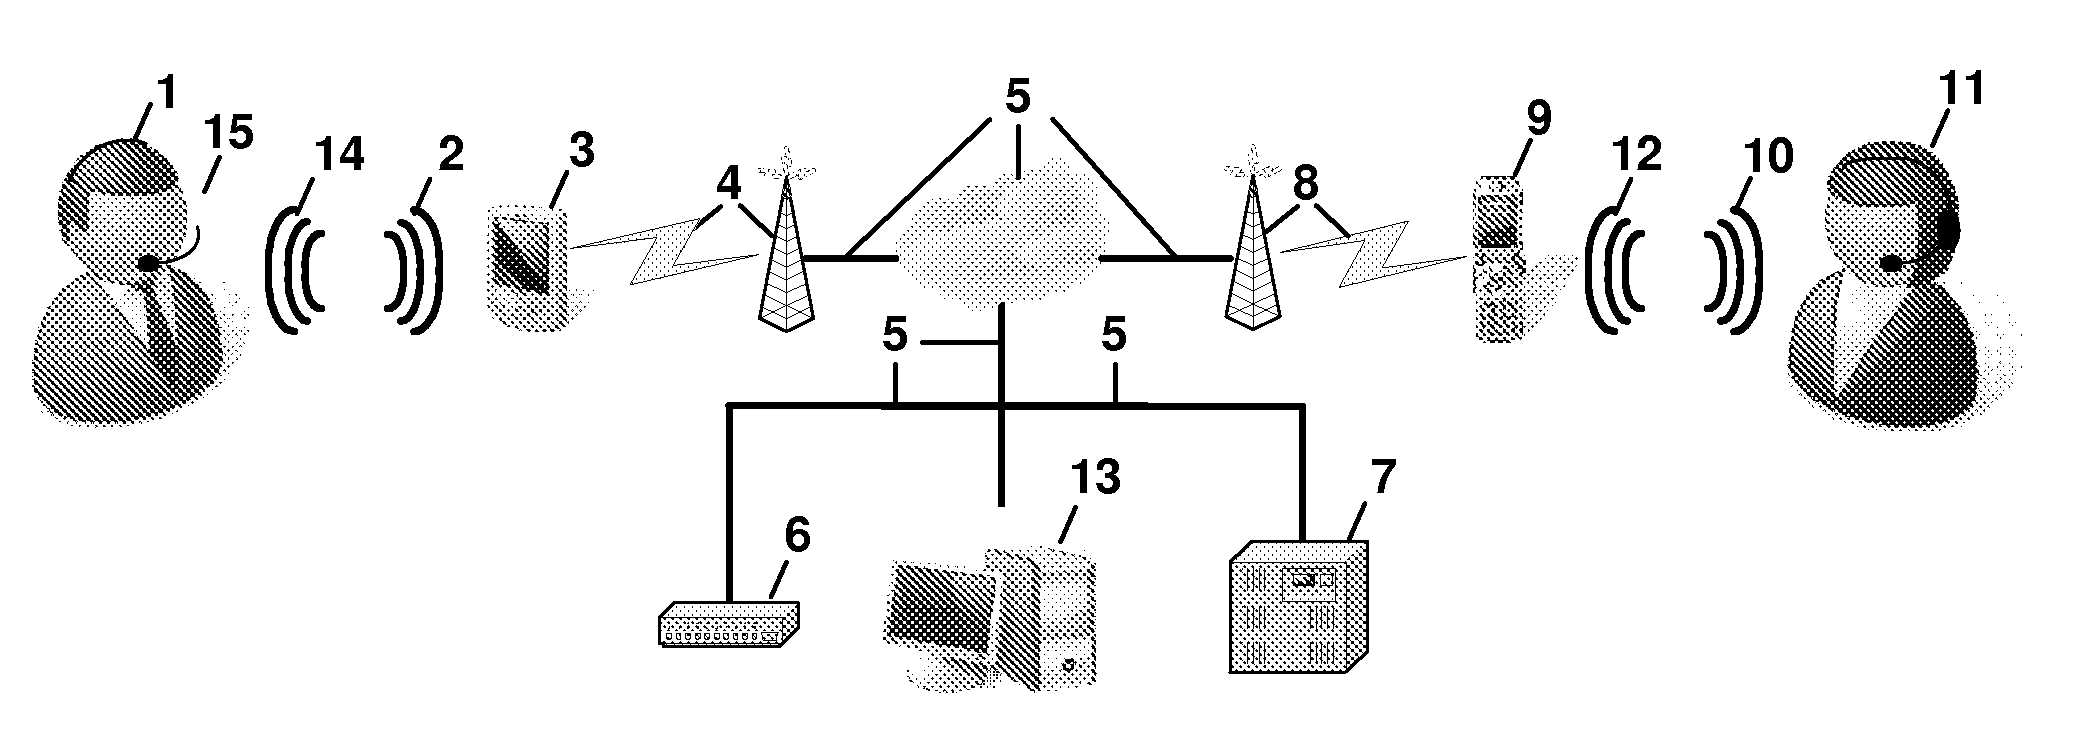 System and method for instant voice-activated communications using advanced telephones and data networks